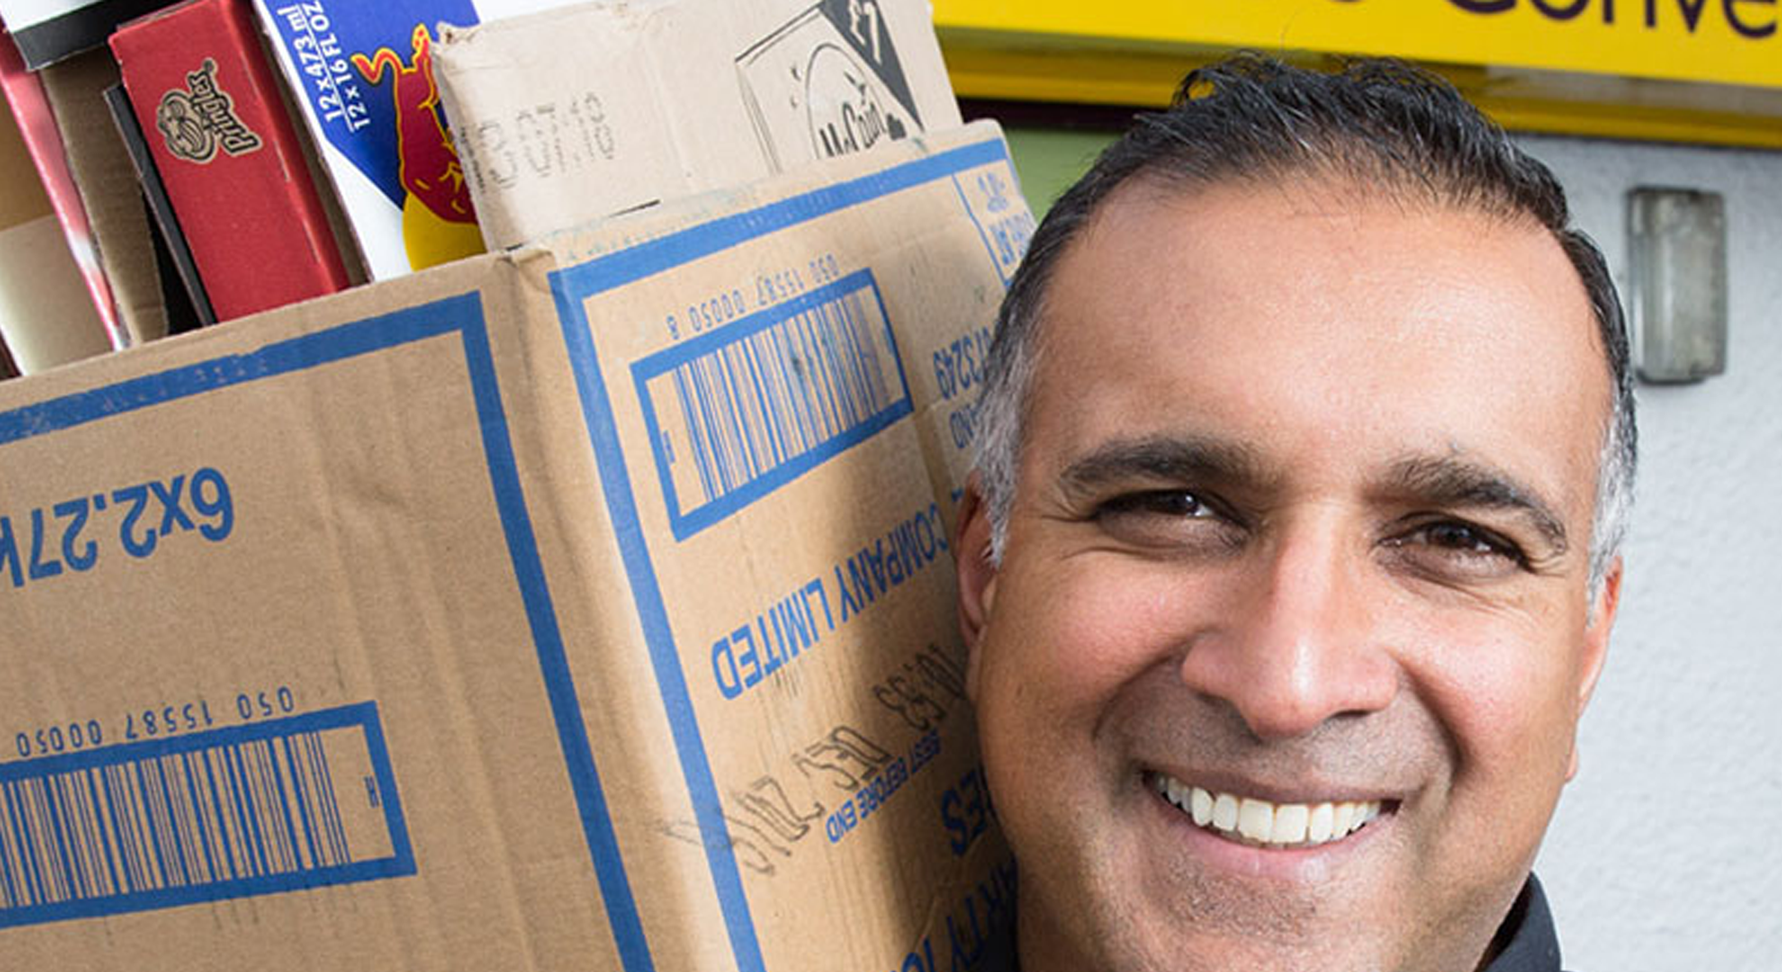 A person smiling while holding a cardboard box